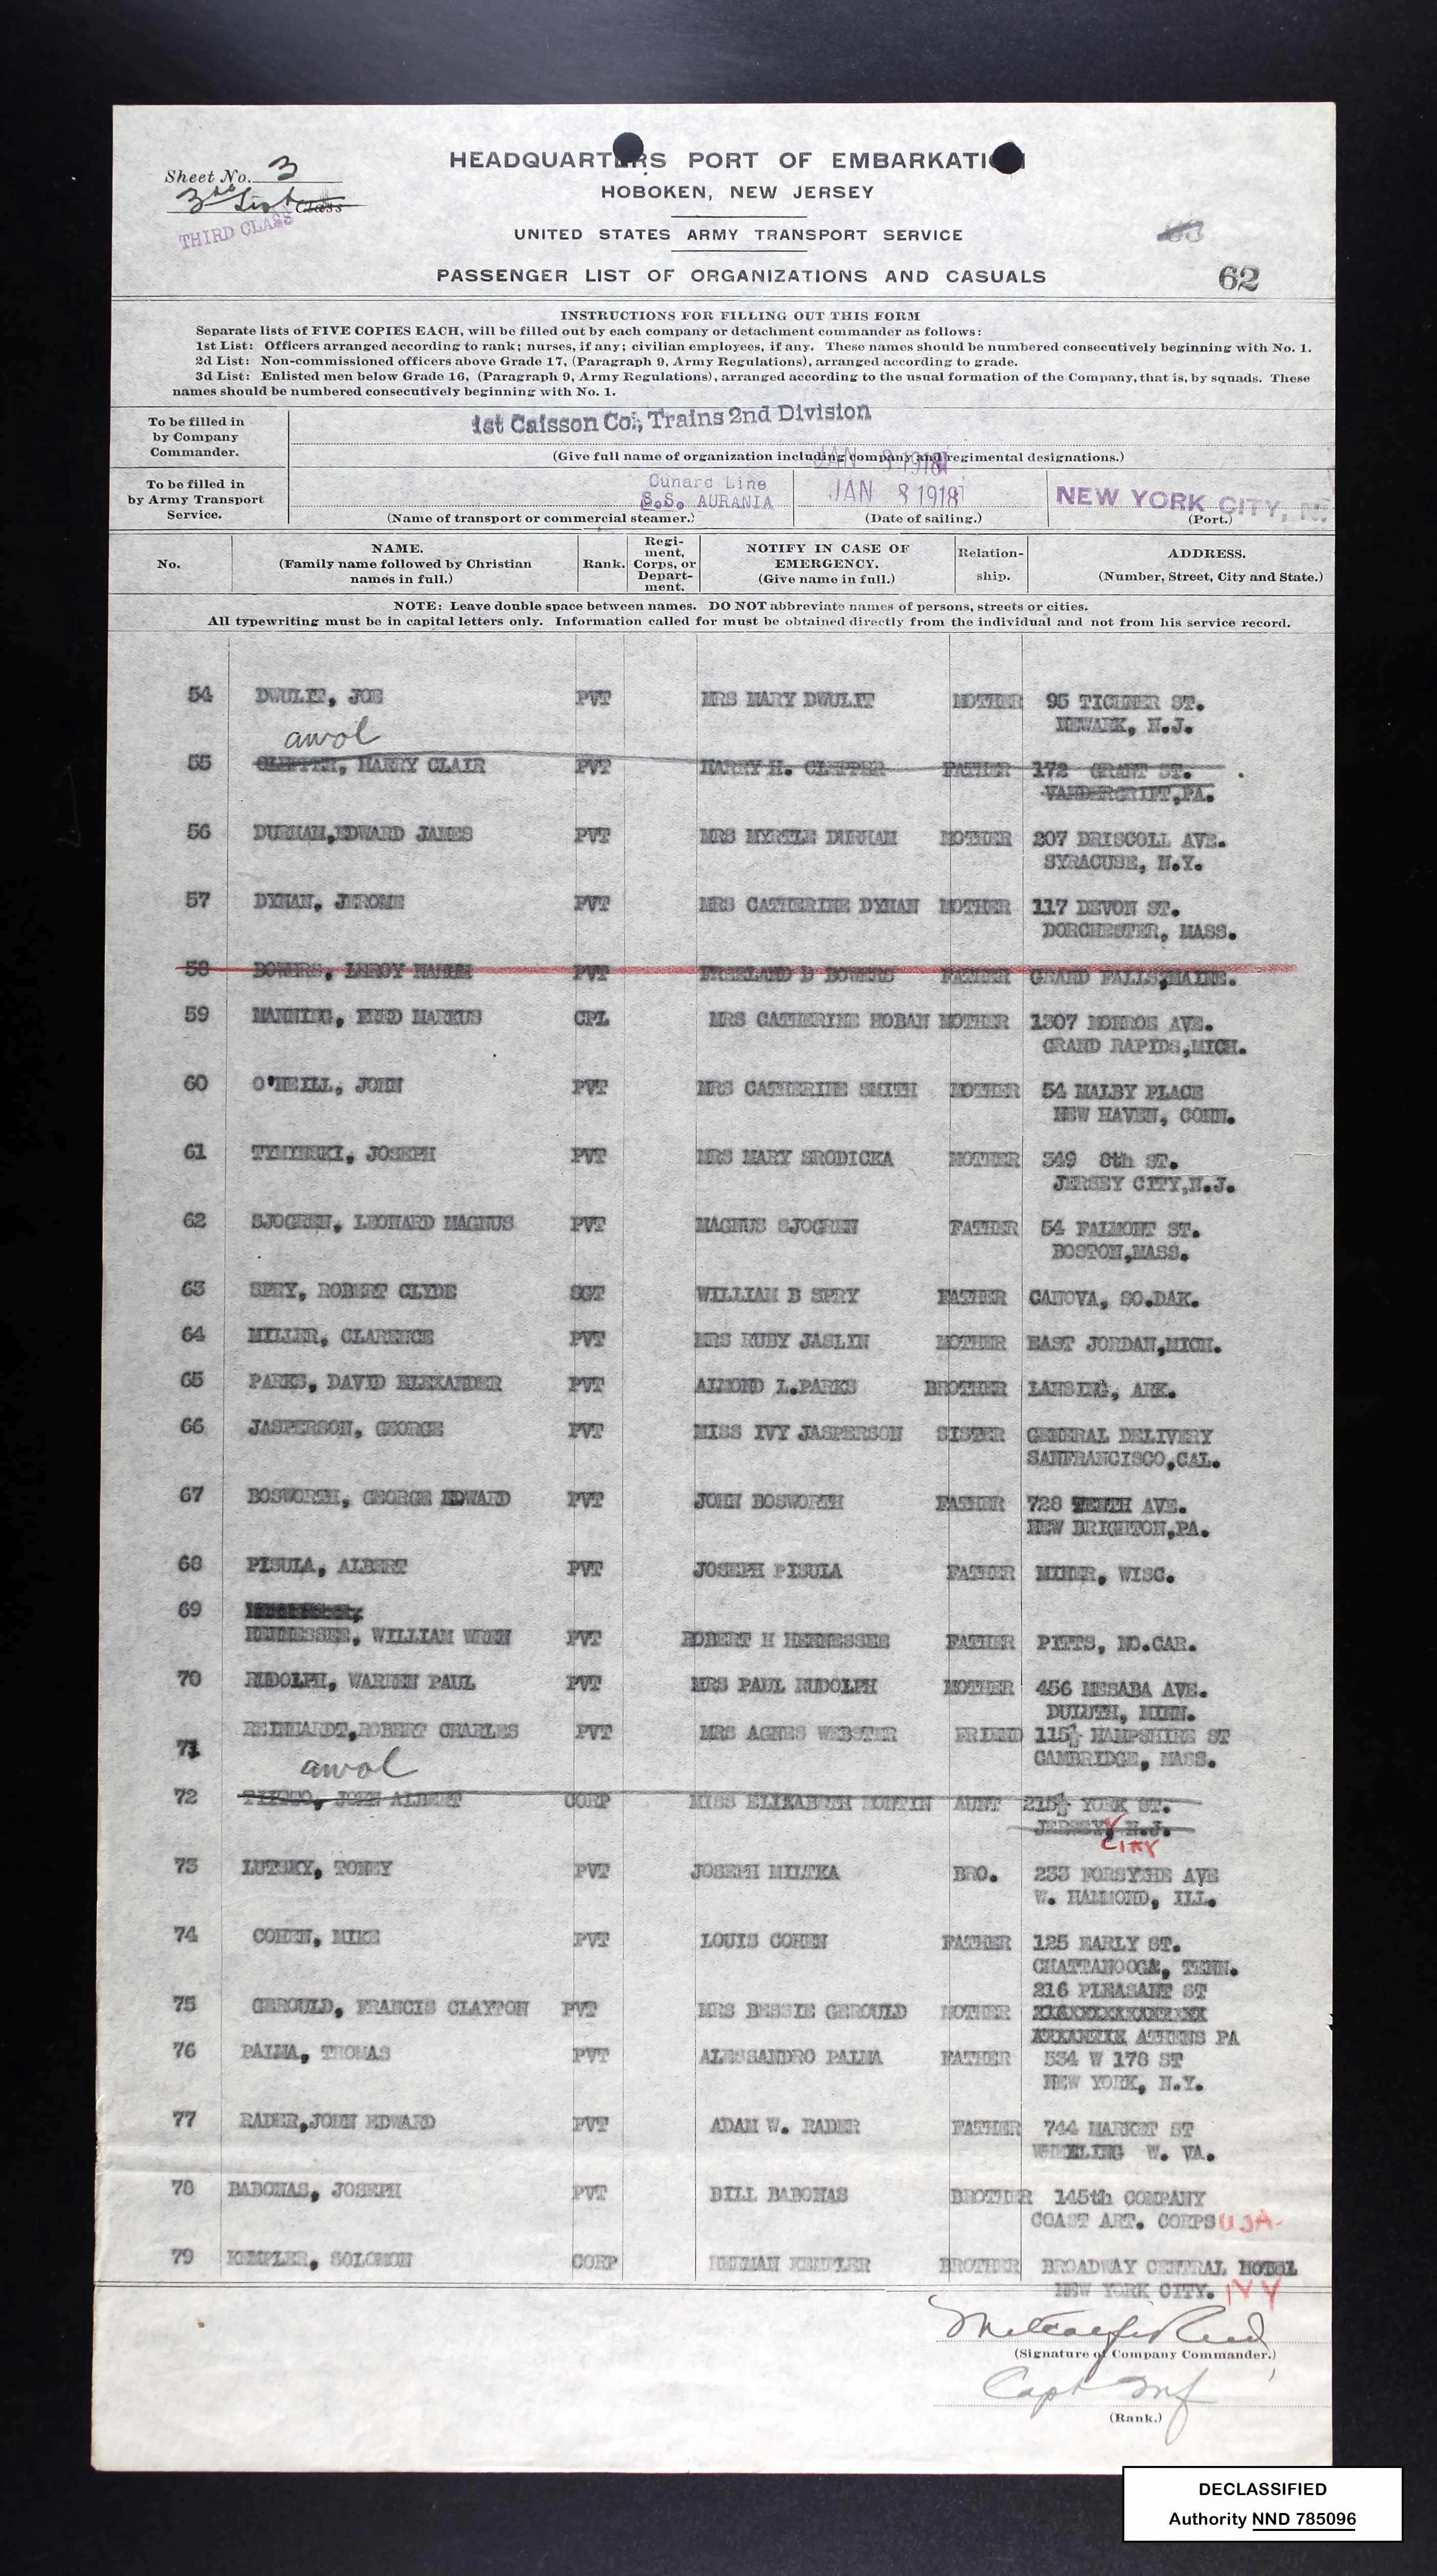 Transport List from the SS Aurania, January 8, 1918, Francis Clayton Gerould, line 75